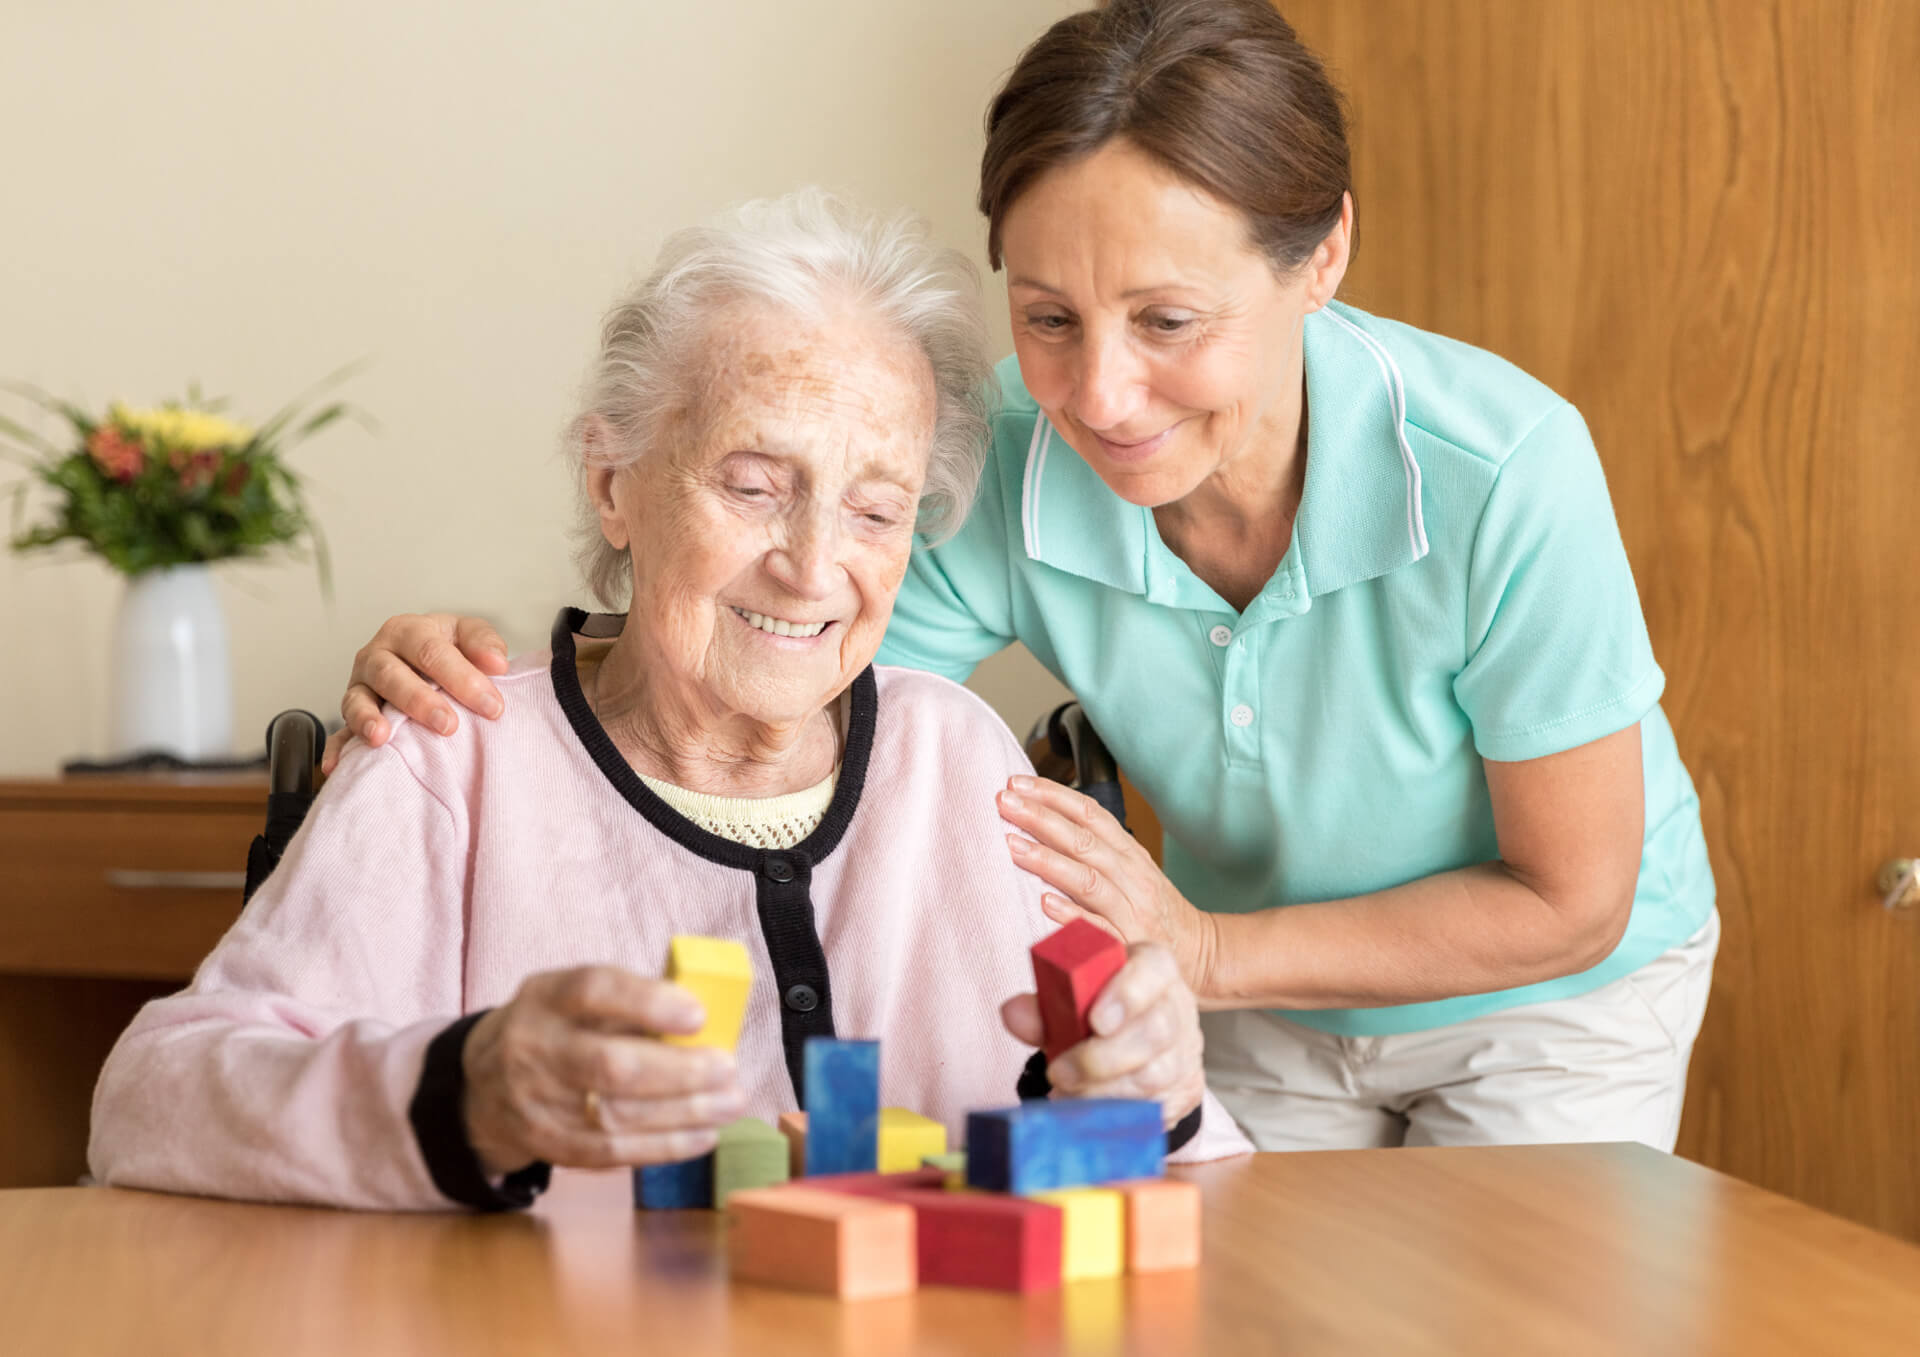 A woman in a polo top has her hand on the shoulders of an elderly woman who is holding coloured blocks. Both are smiling.